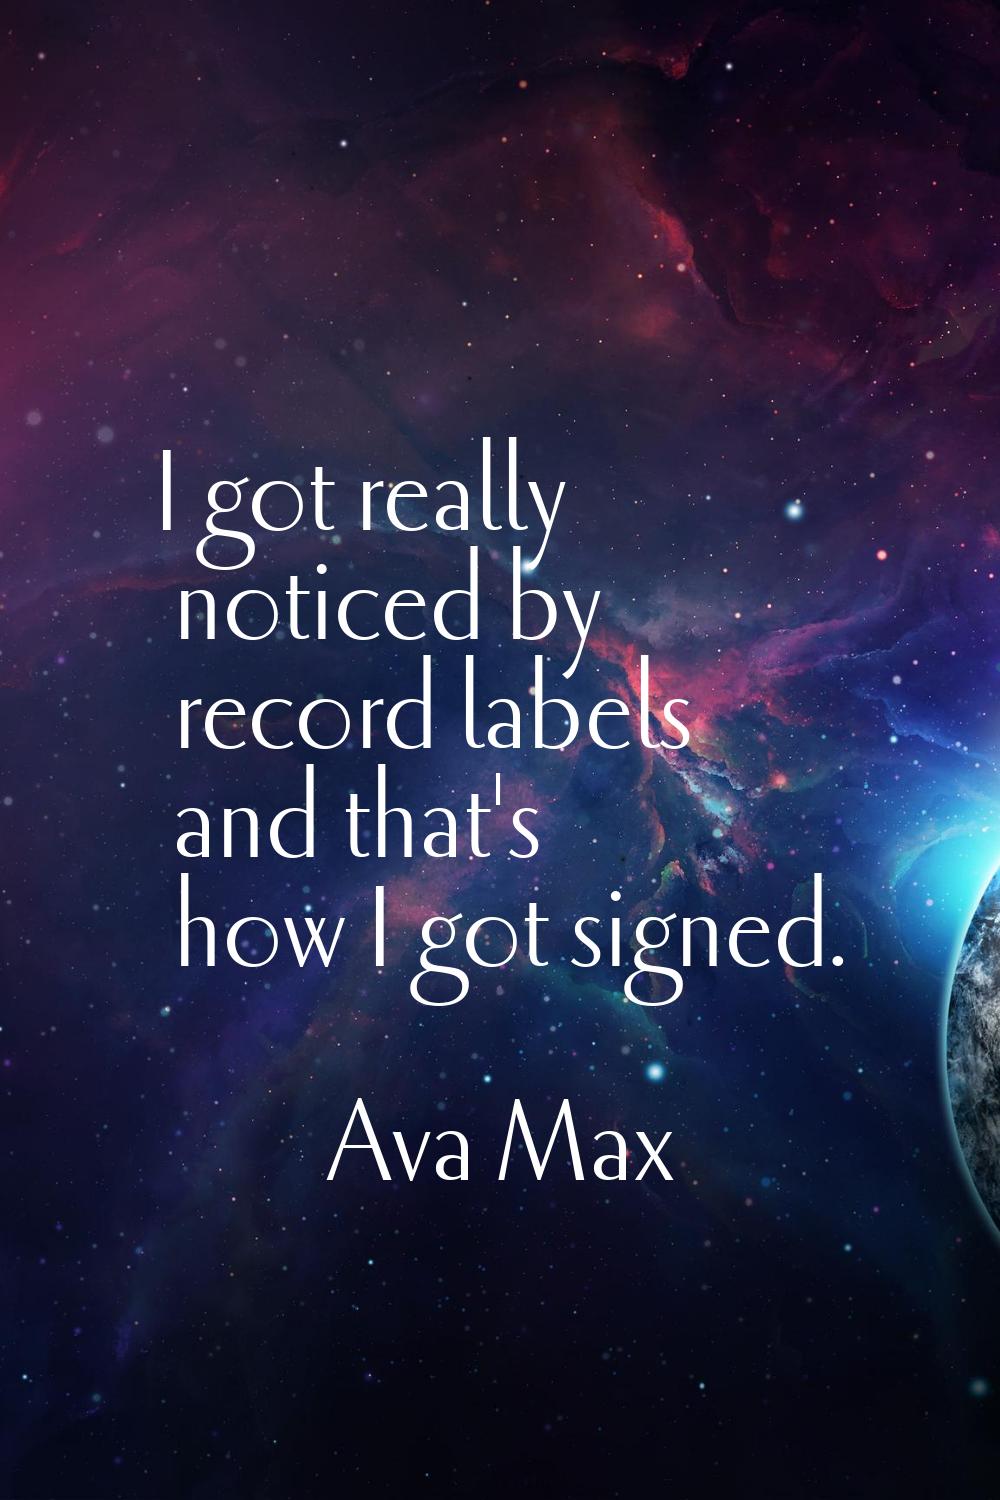 I got really noticed by record labels and that's how I got signed.